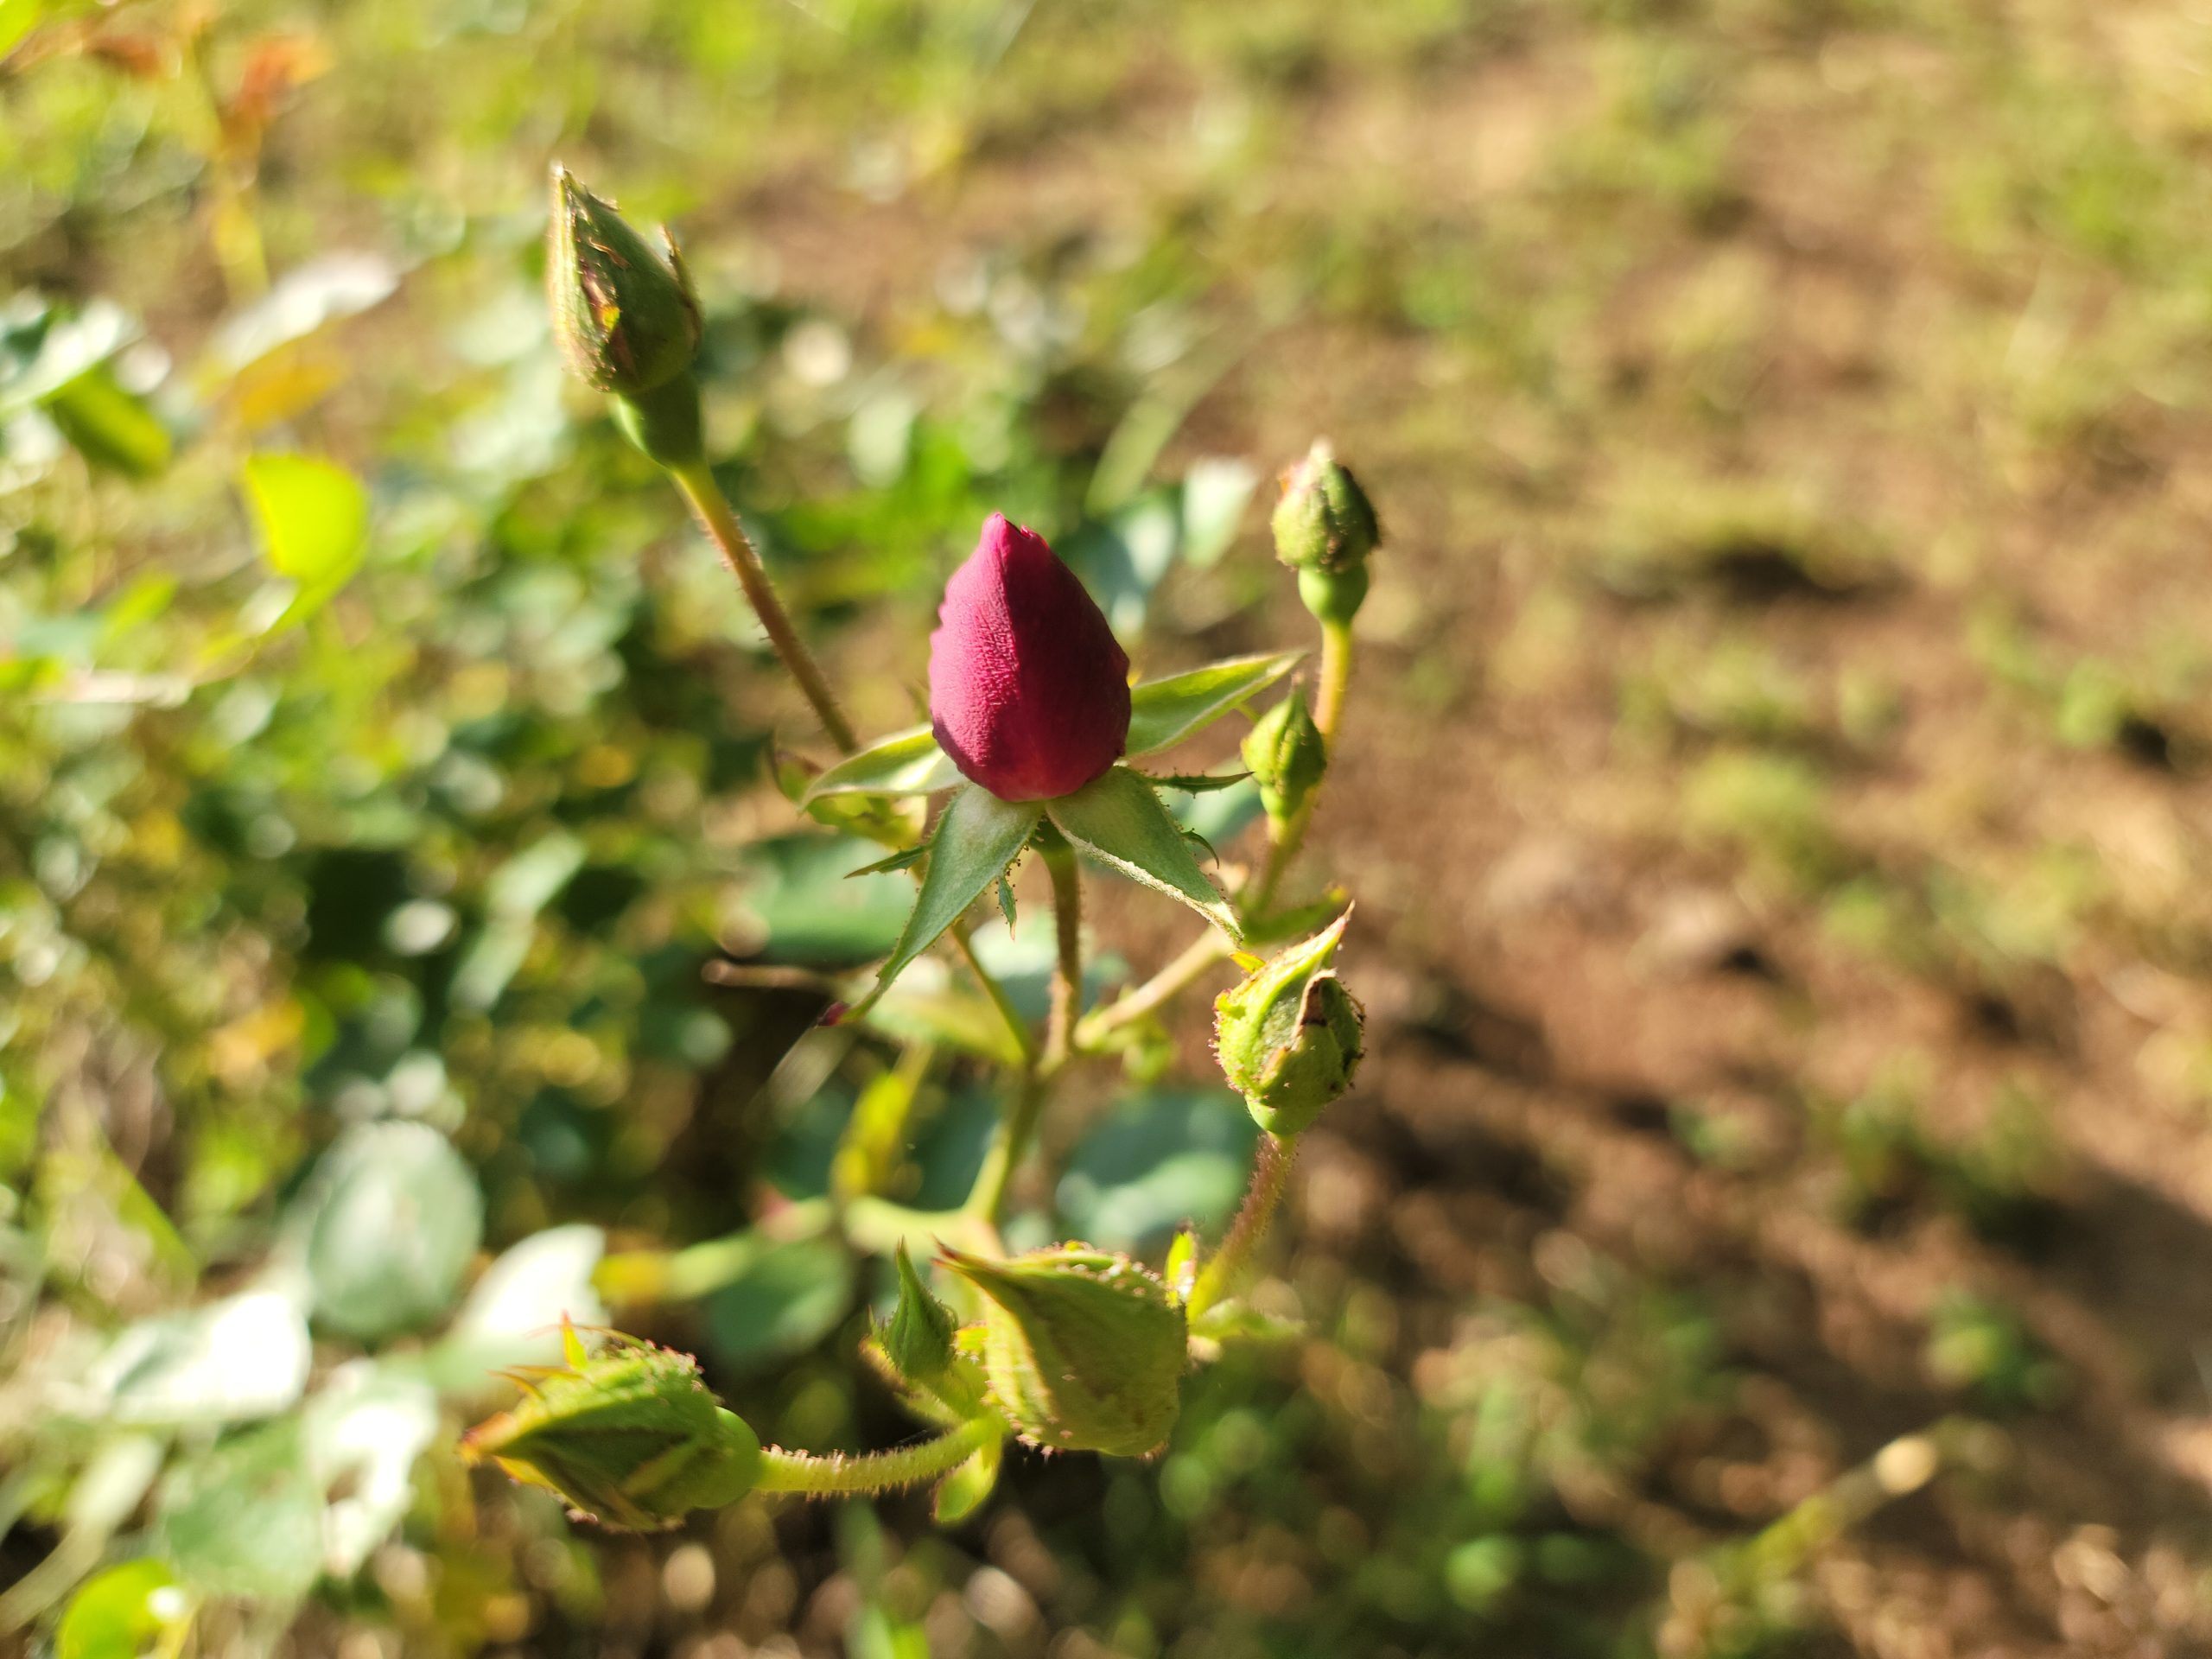 Roses opening sooner than later